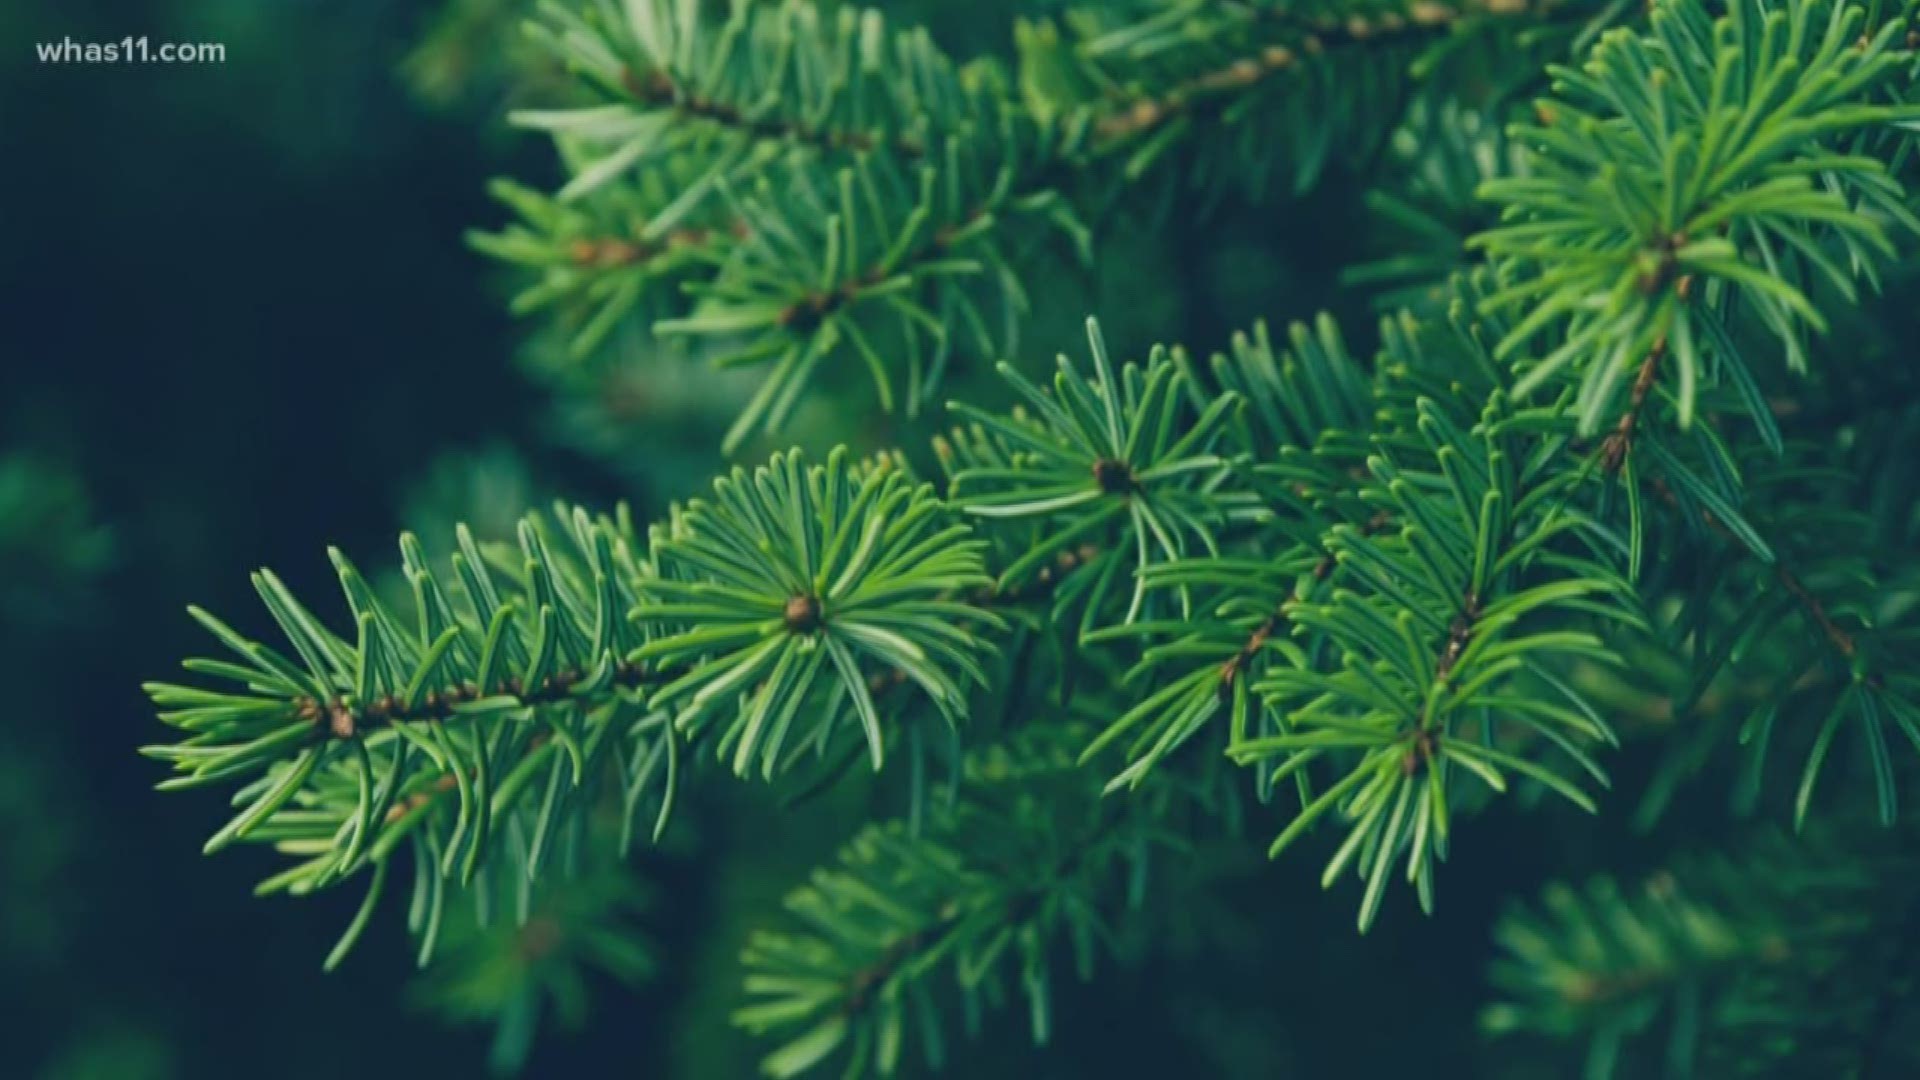 Your Christmas tree will likely stay green throughout the entire holiday season. What makes these trees different from ones that change colors in the fall?